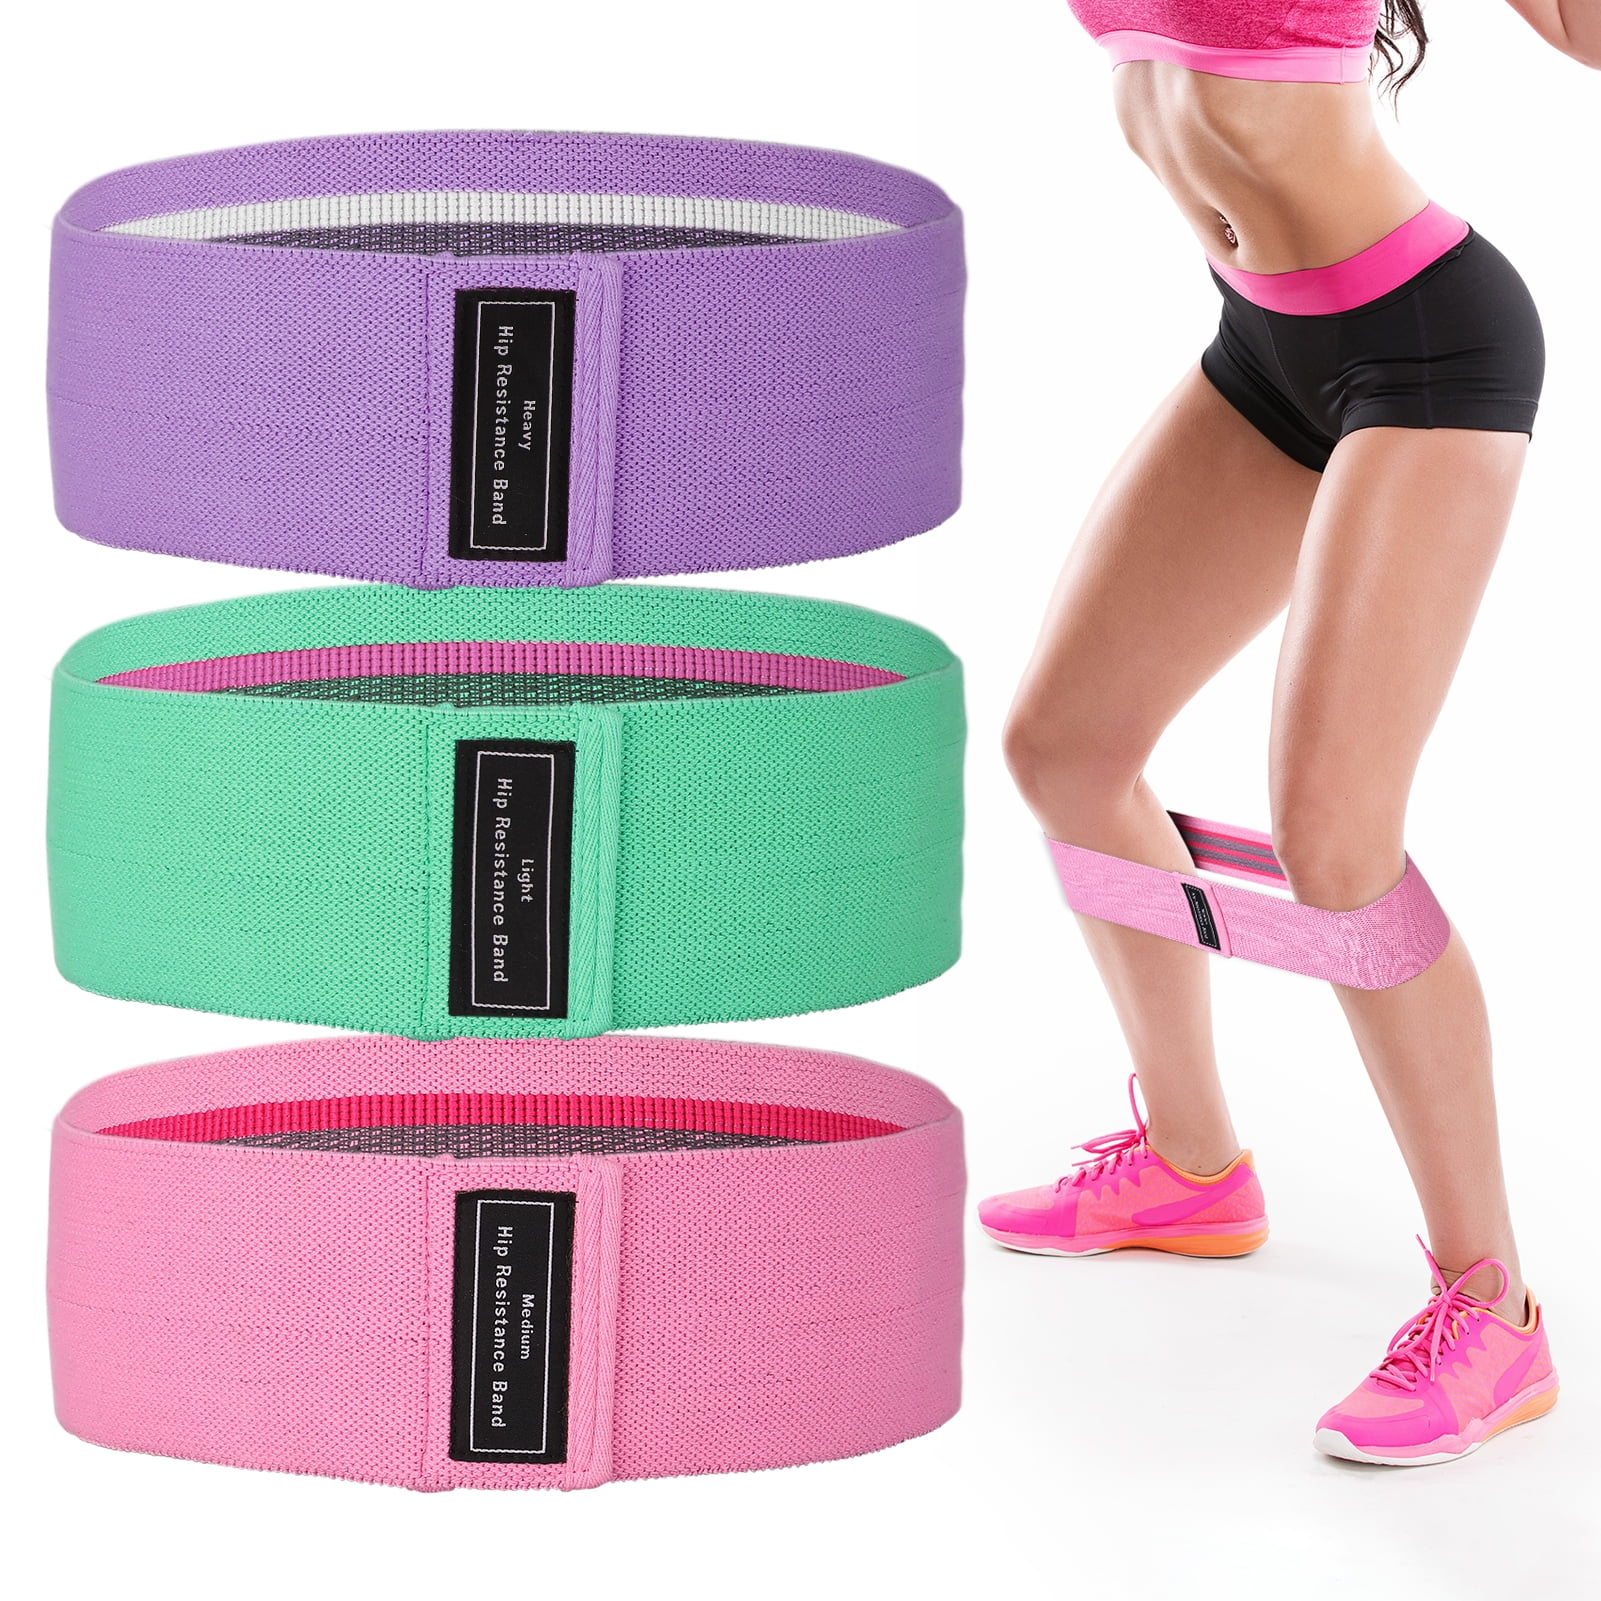 Workout Lifter Set Glute Squat Band Bundle with Resistance Elastic Belt & Support Pads Thigh I Am Extrema Booty Bands Kit for Women Leg 